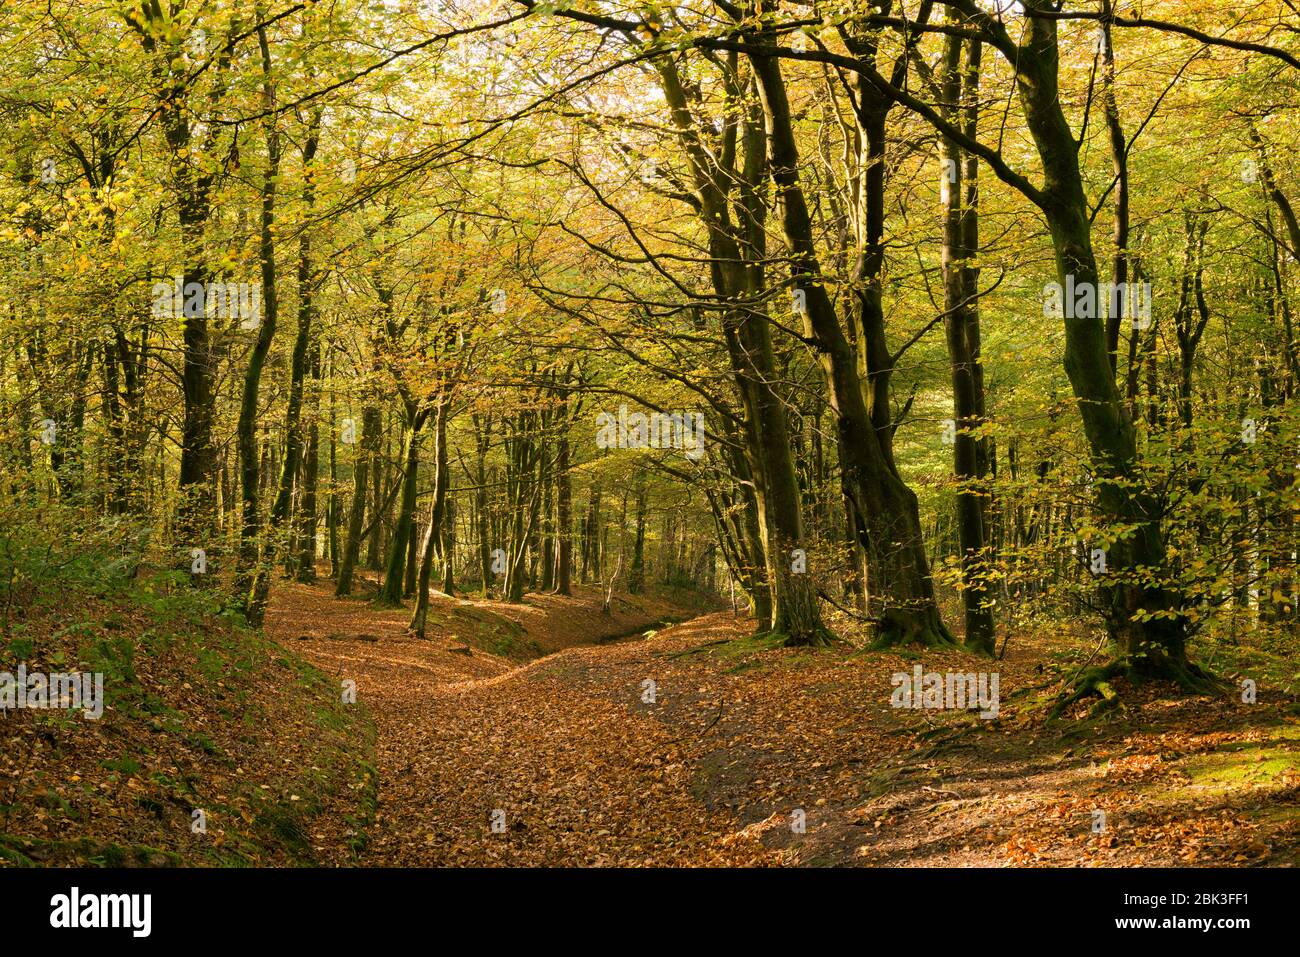 Autumn in Beacon Hill Wood in the Mendip Hills, Somerset, England. Stock Photo